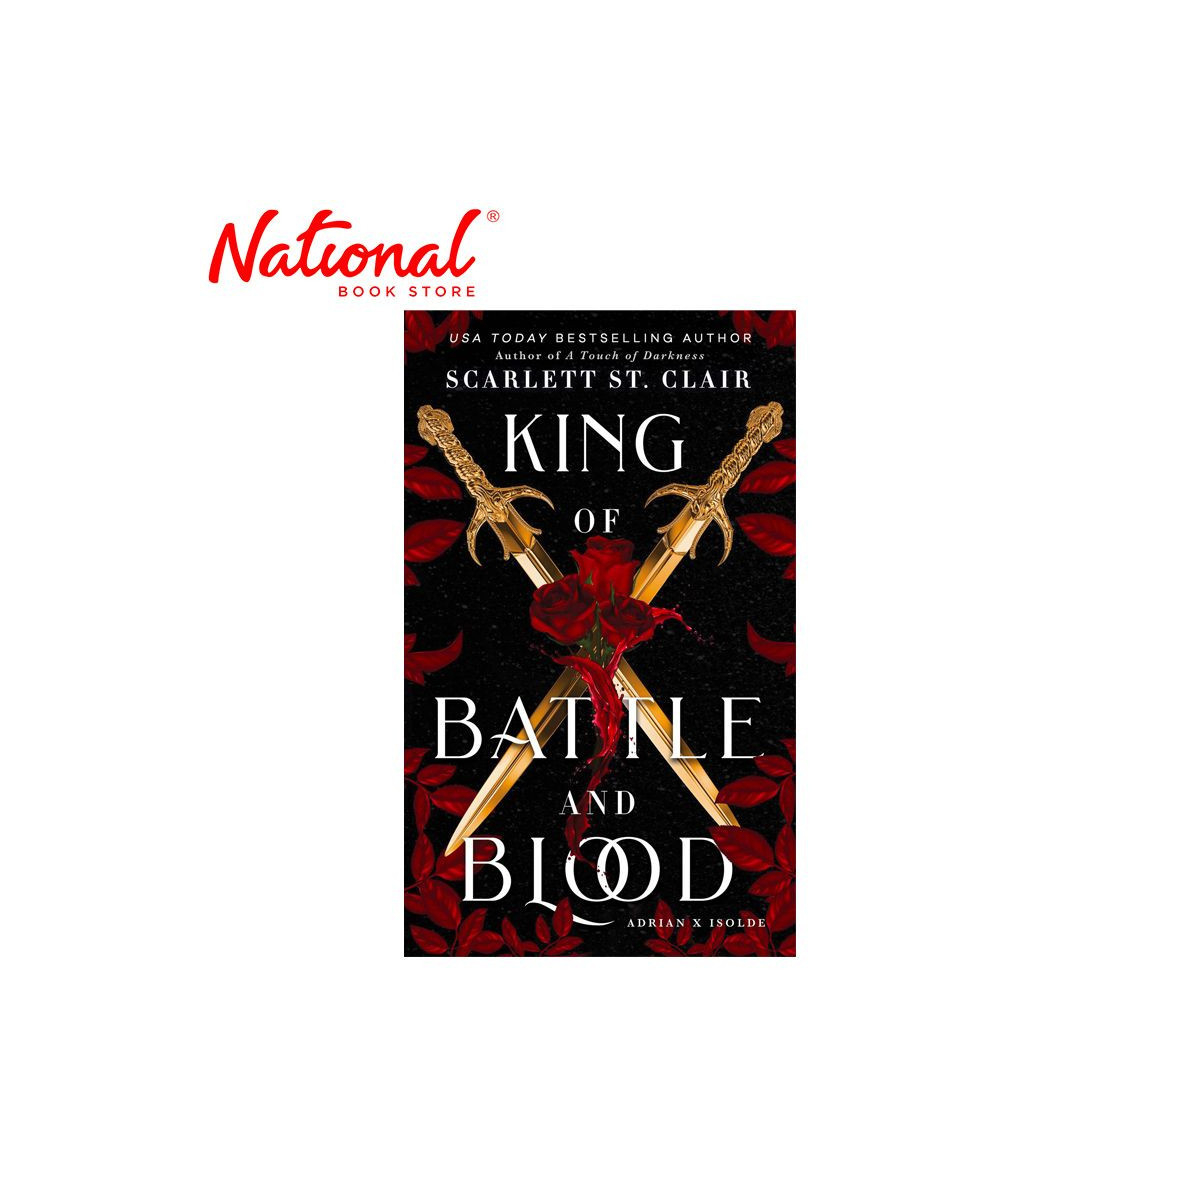 Adrian X Isolde No.1: King Of Battle And Blood Trade Paperback by Scarlett St. Clair - Romance